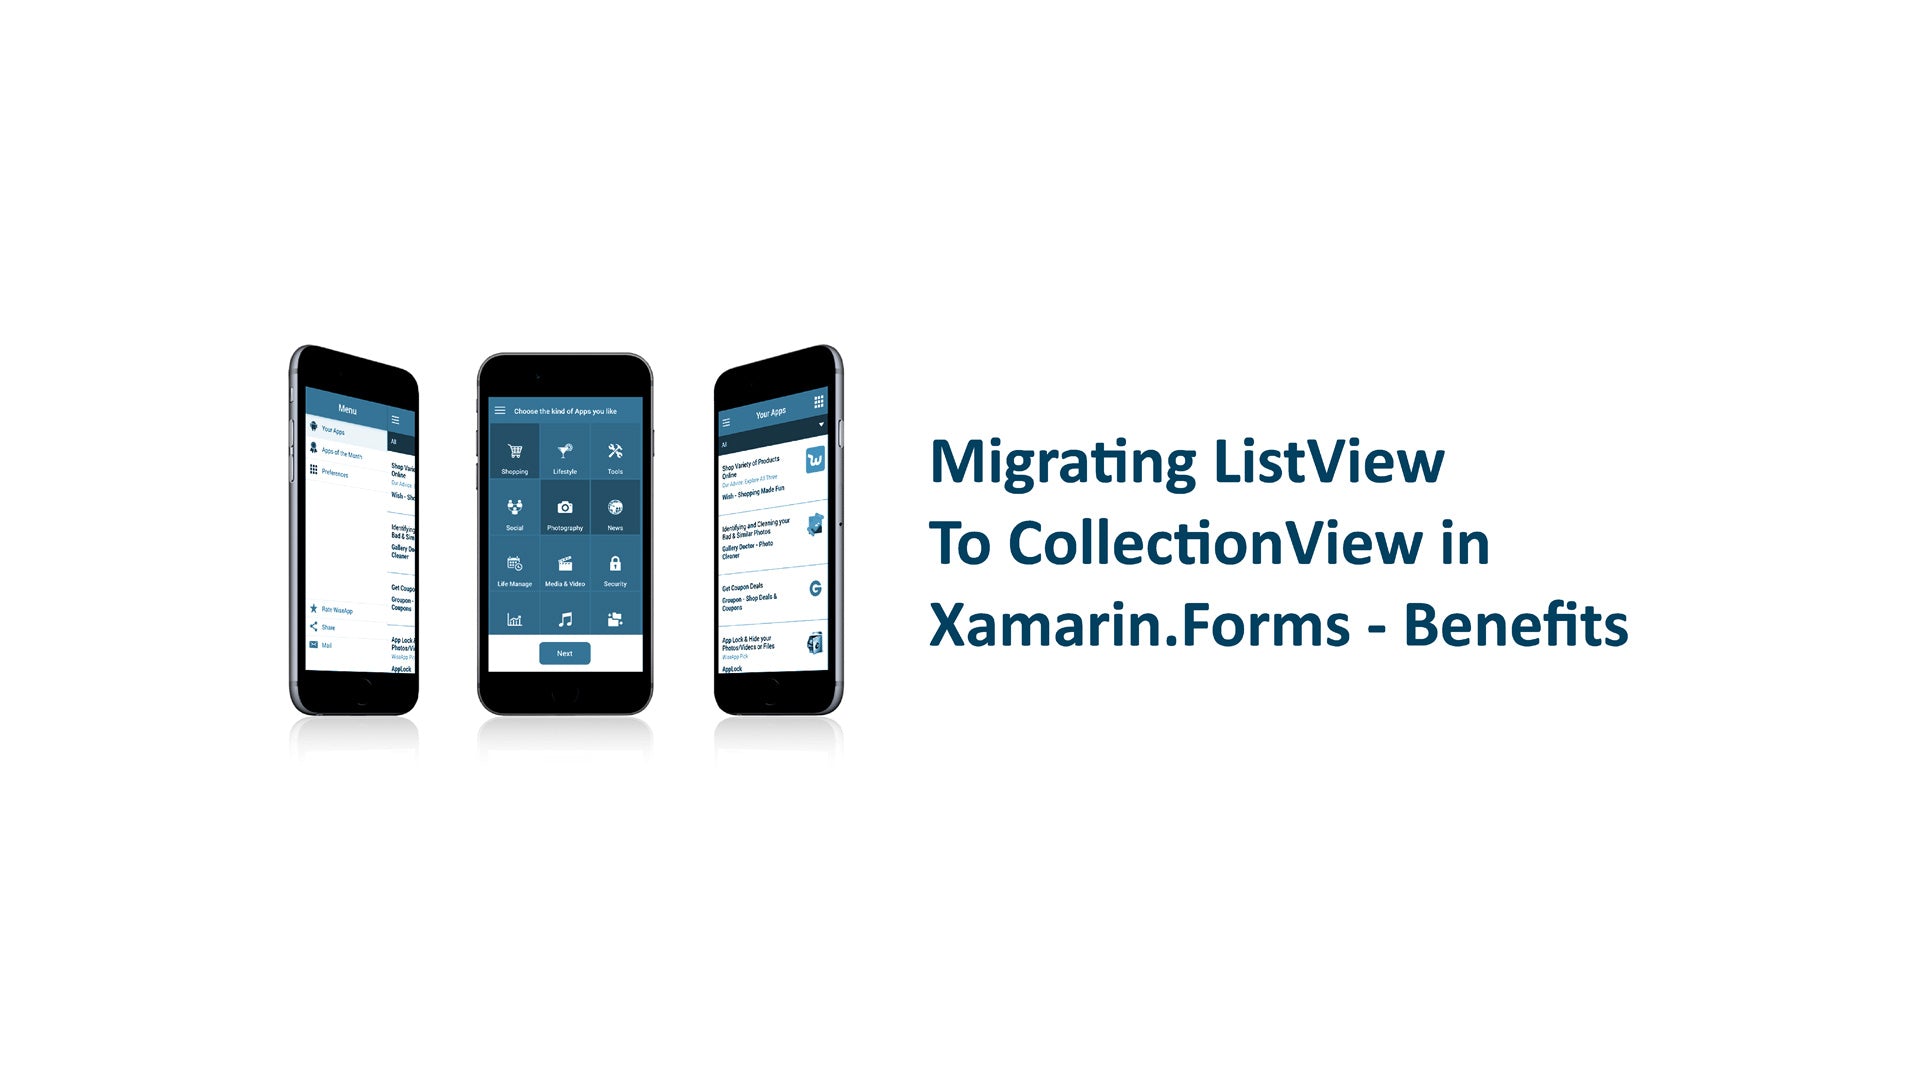 Migrating ListView To CollectionView in Xamarin.Forms - Benefits